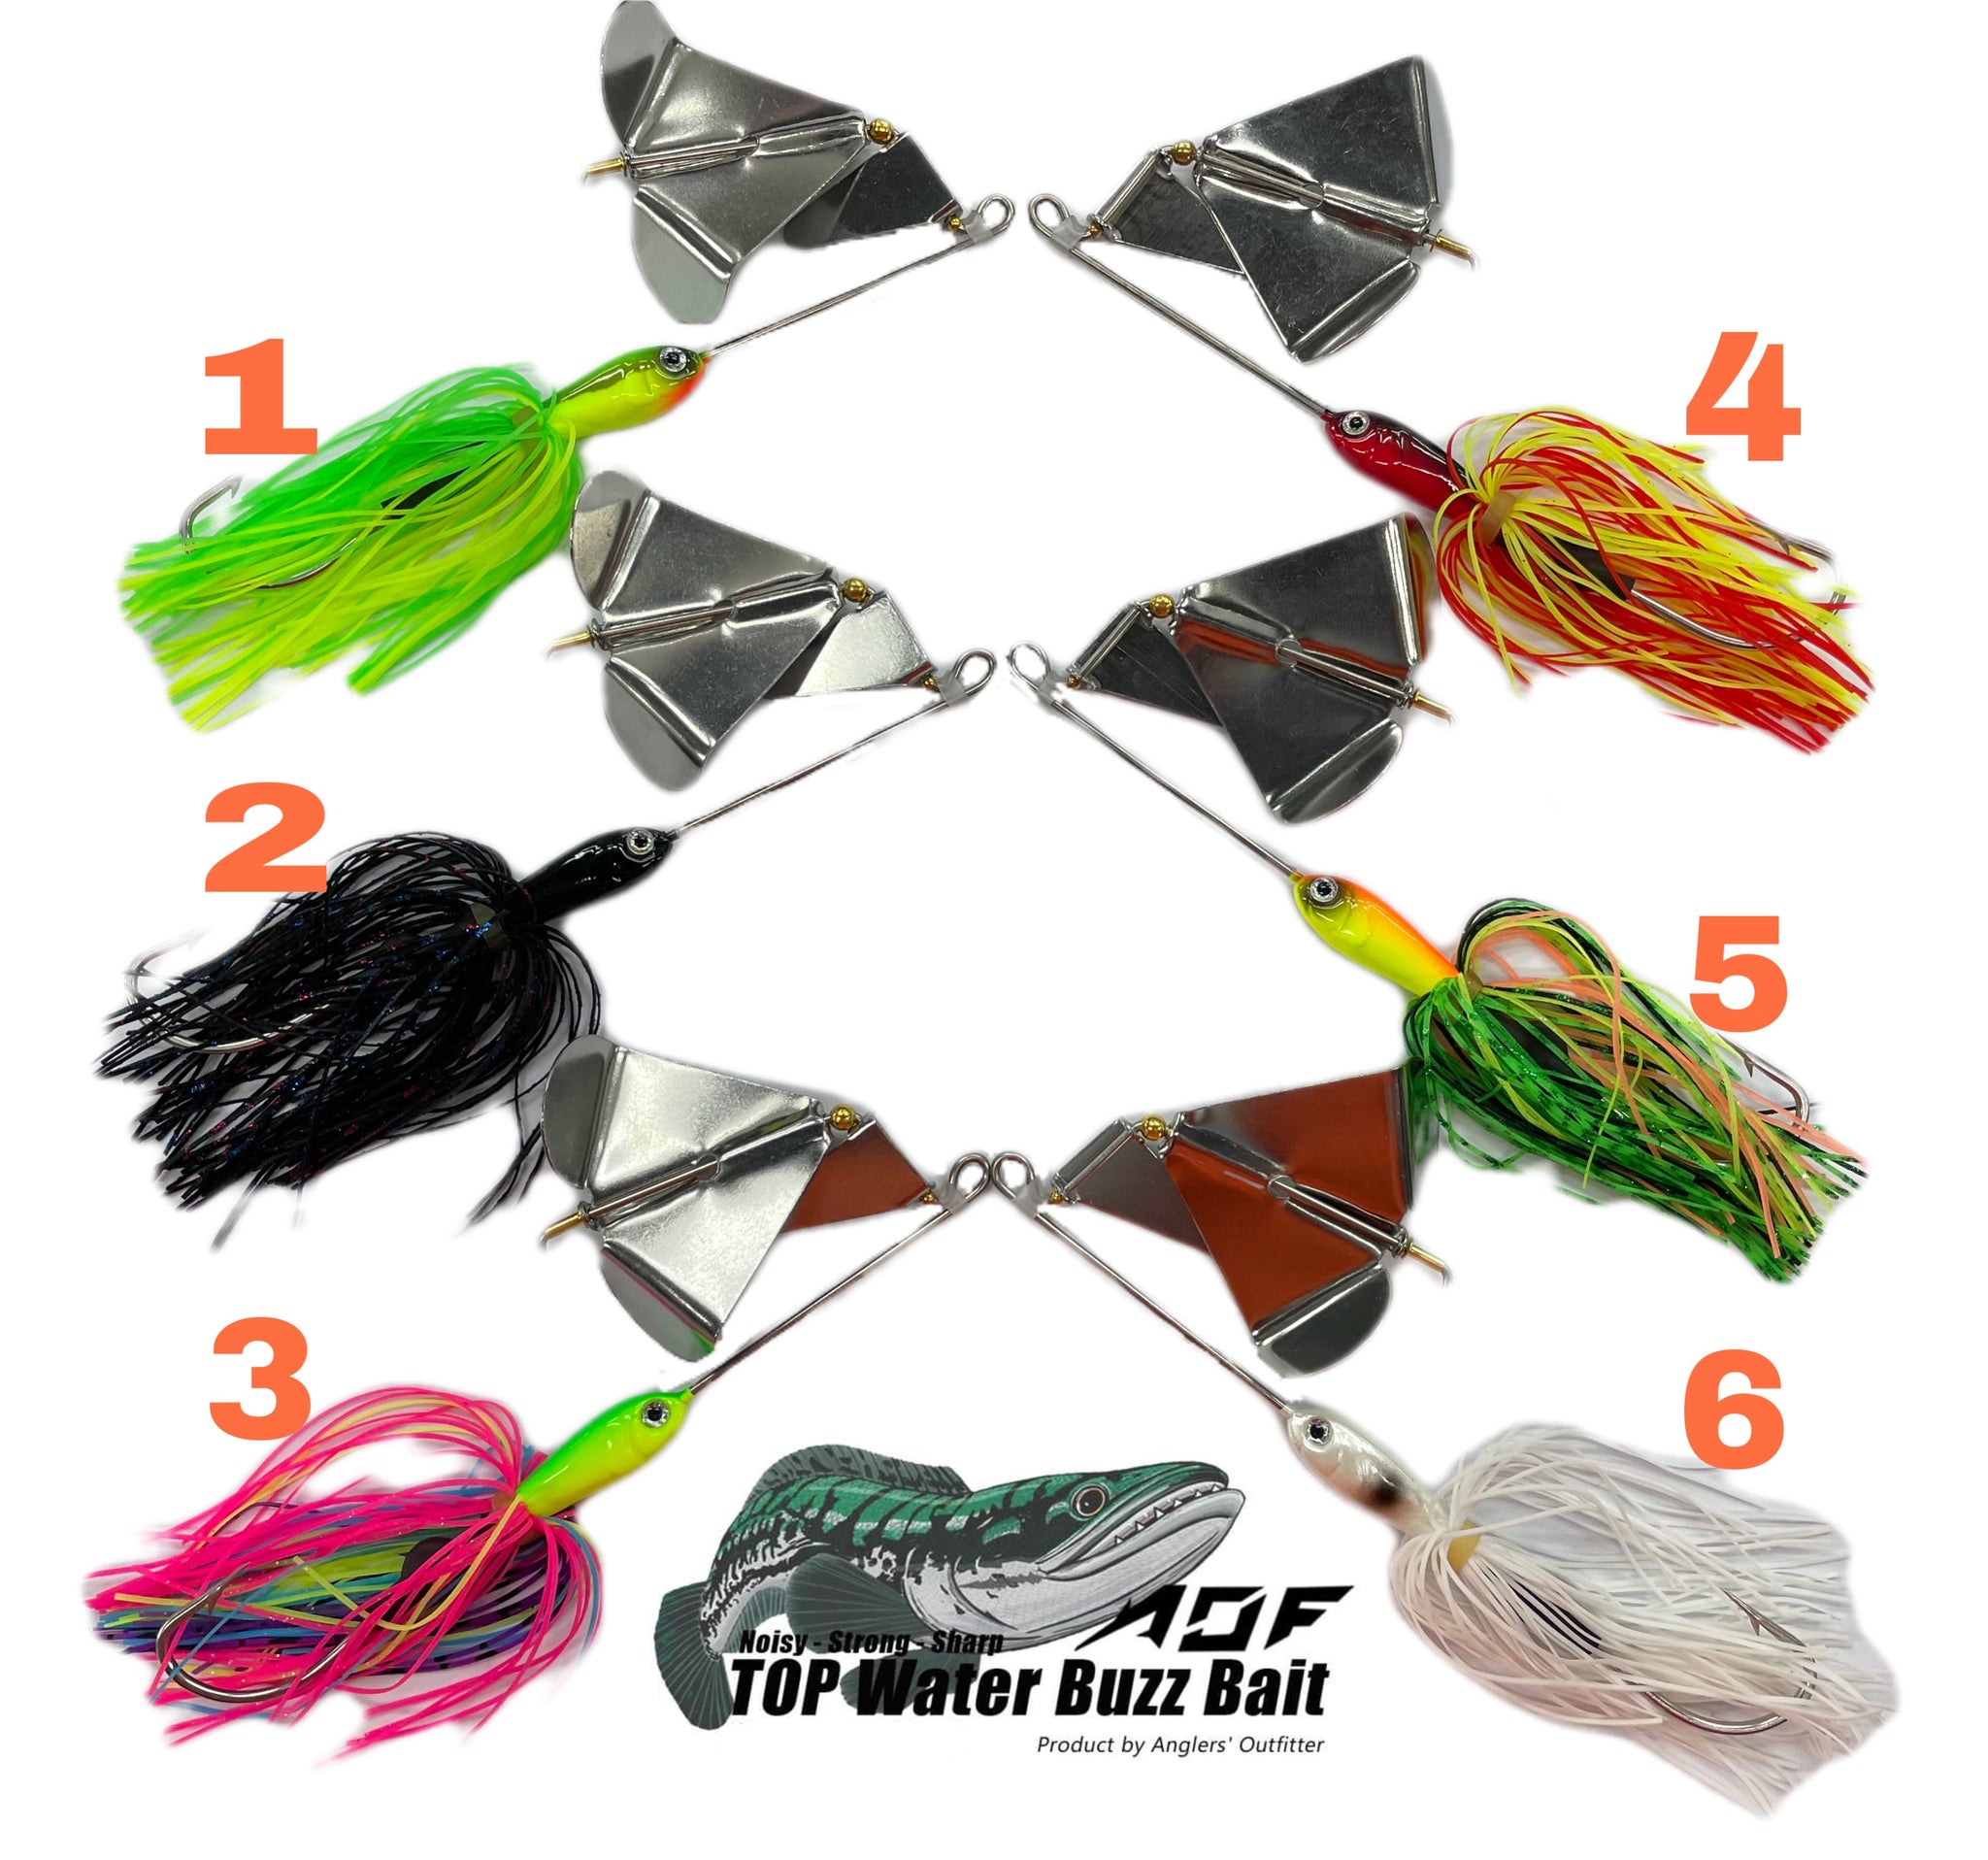 AOF Top Water Buzz Bait for Giant Snakehead (Flexible Hook Connection) –  Anglers Outfitter - AOF